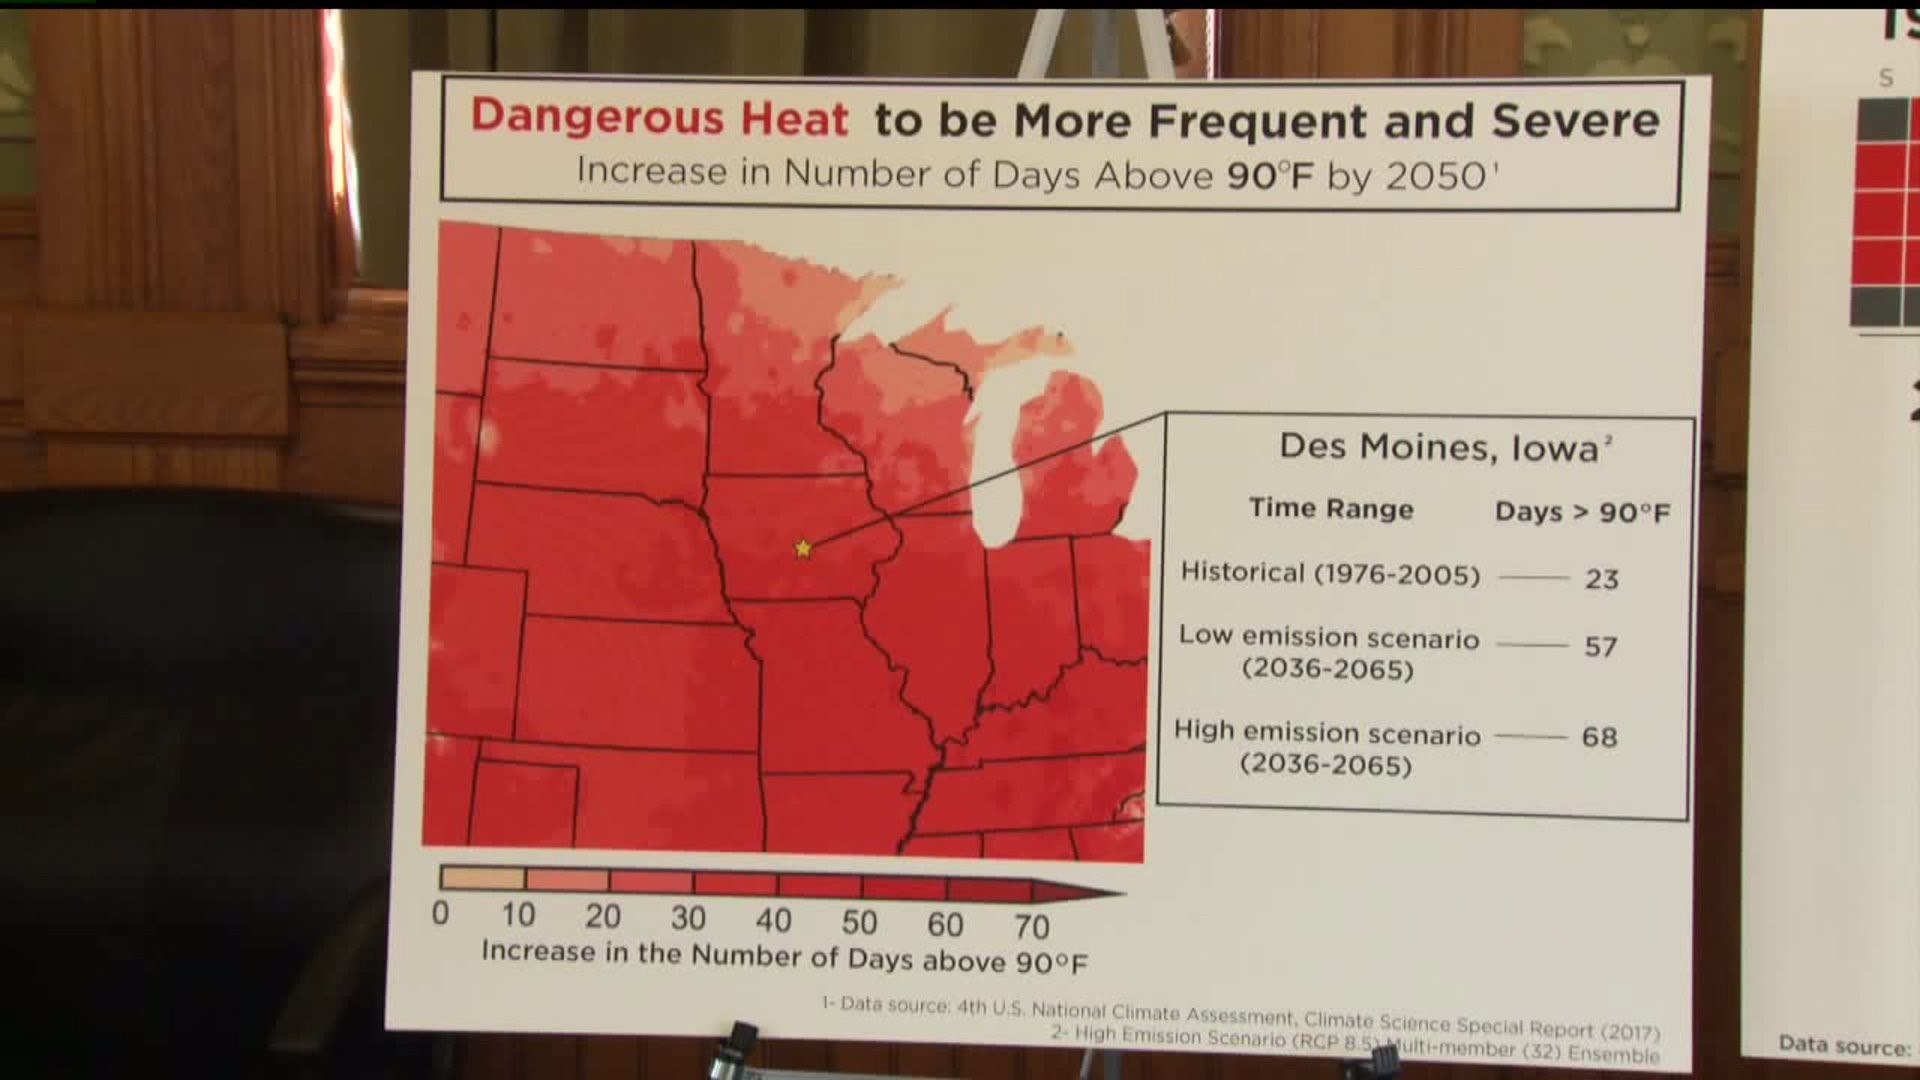 Climate scientists all agree Iowa is getting hotter